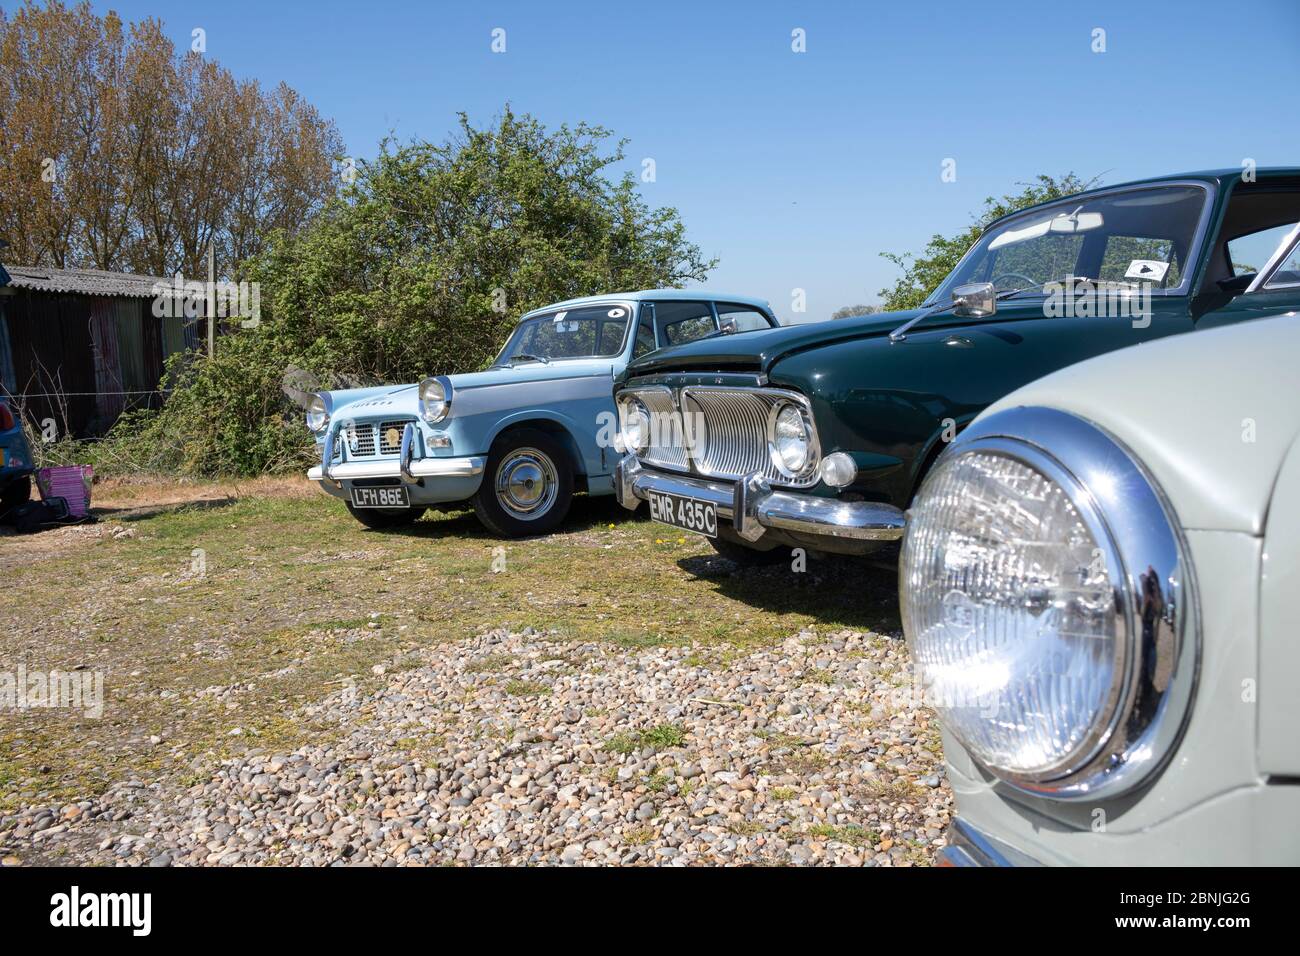 A row of beautiful classic cars, looking at the front from the side. Glistening in the sun on a bright, sunny day Stock Photo